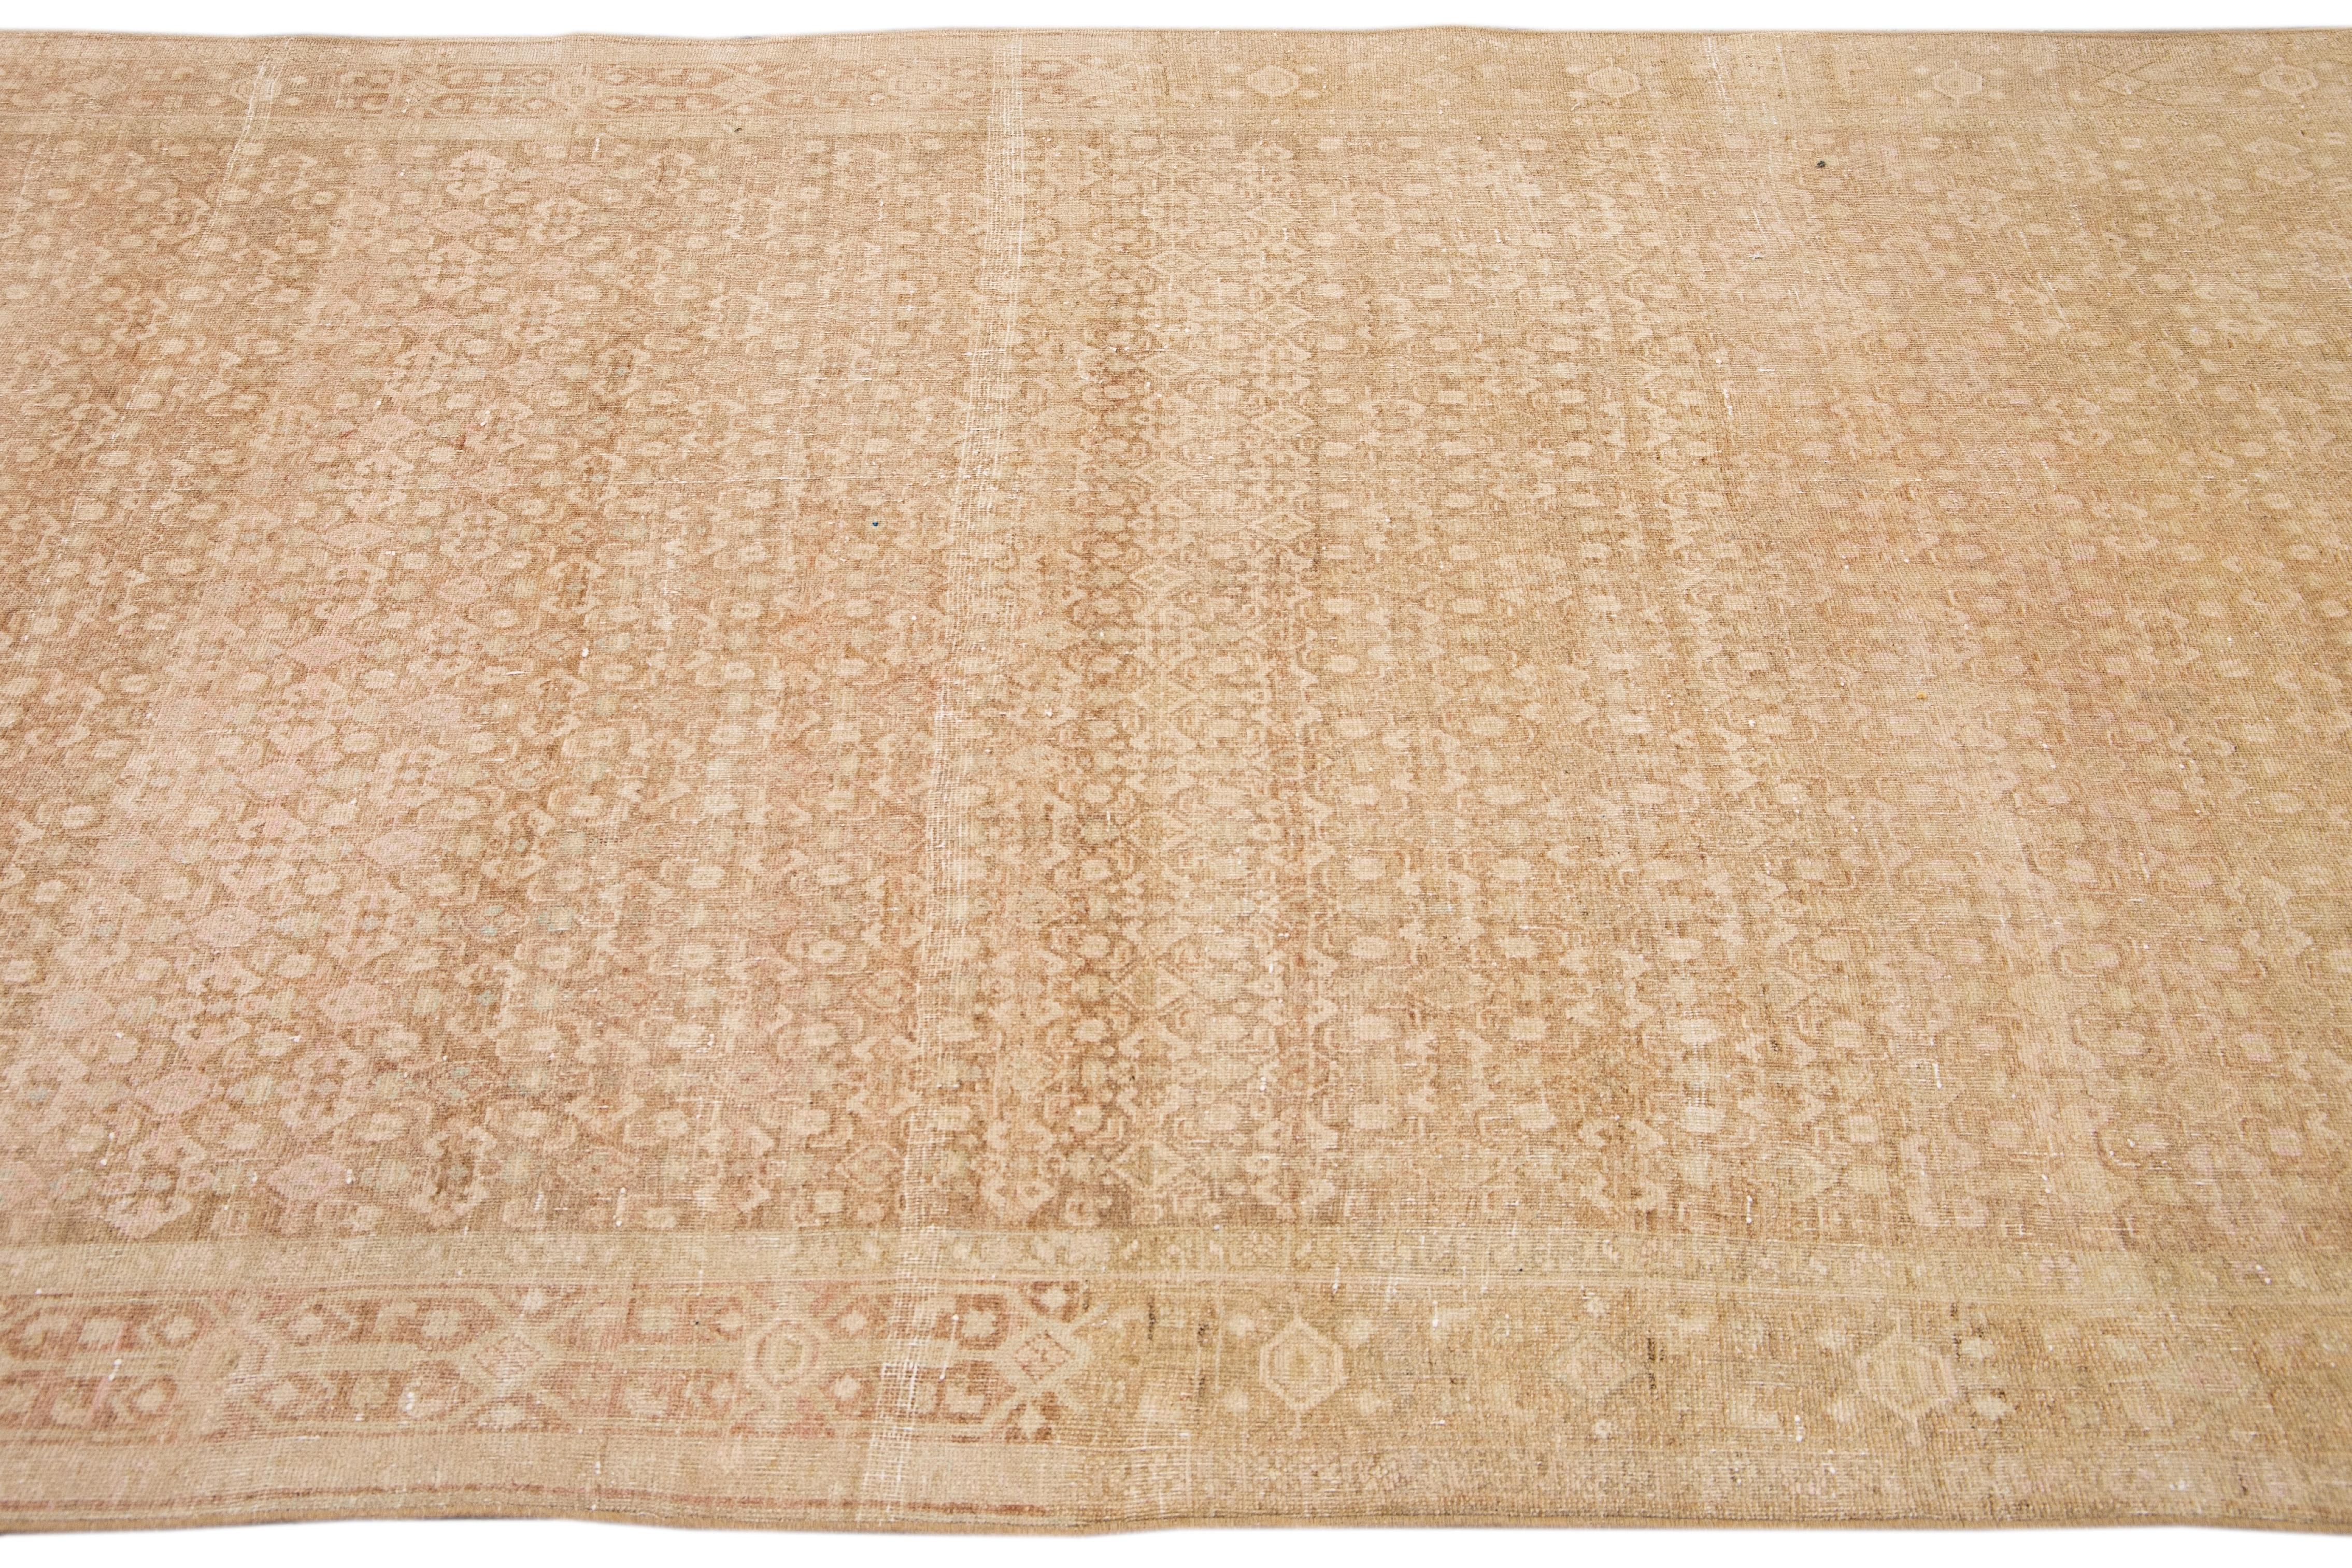 Antique Malayer Handmade Allover Design Beige Wool Rug In Good Condition For Sale In Norwalk, CT